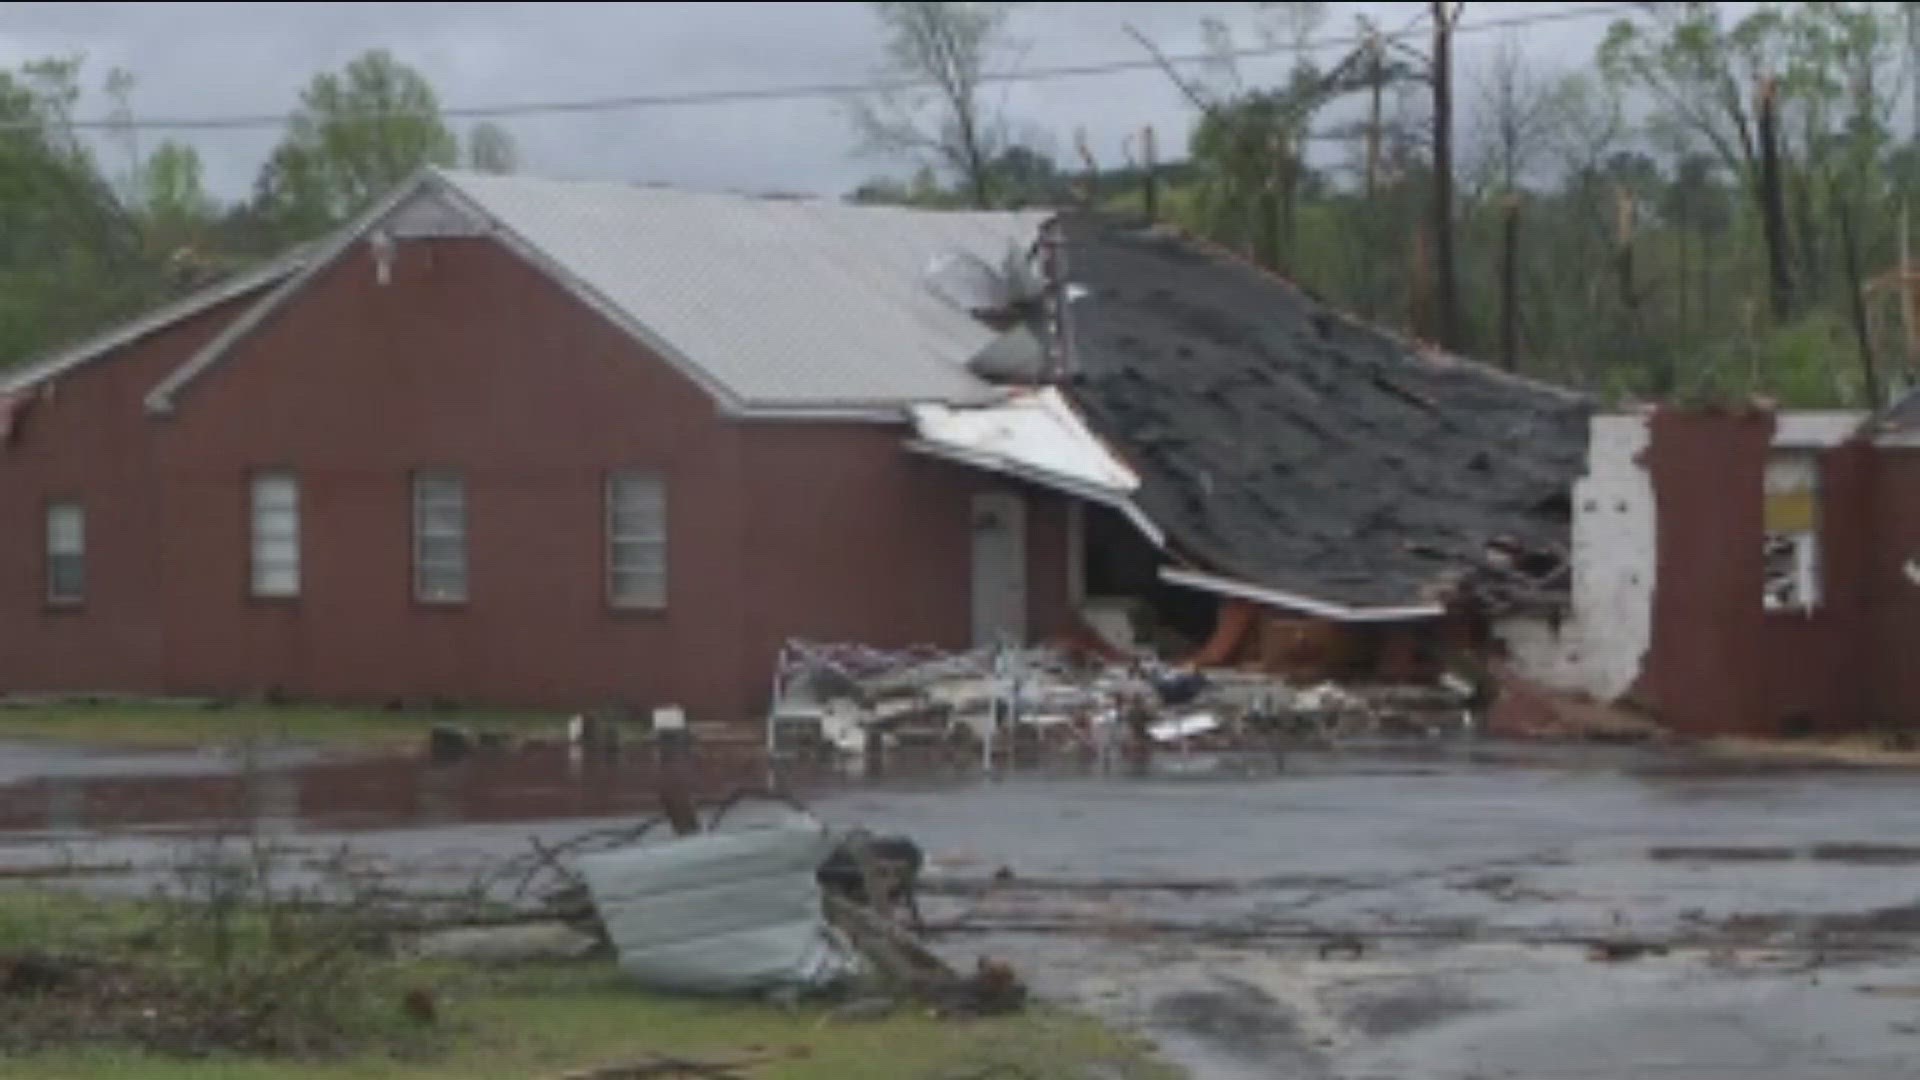 Troup County Deputies said there were 80 to 100 homes with damage after a tornado touched down.